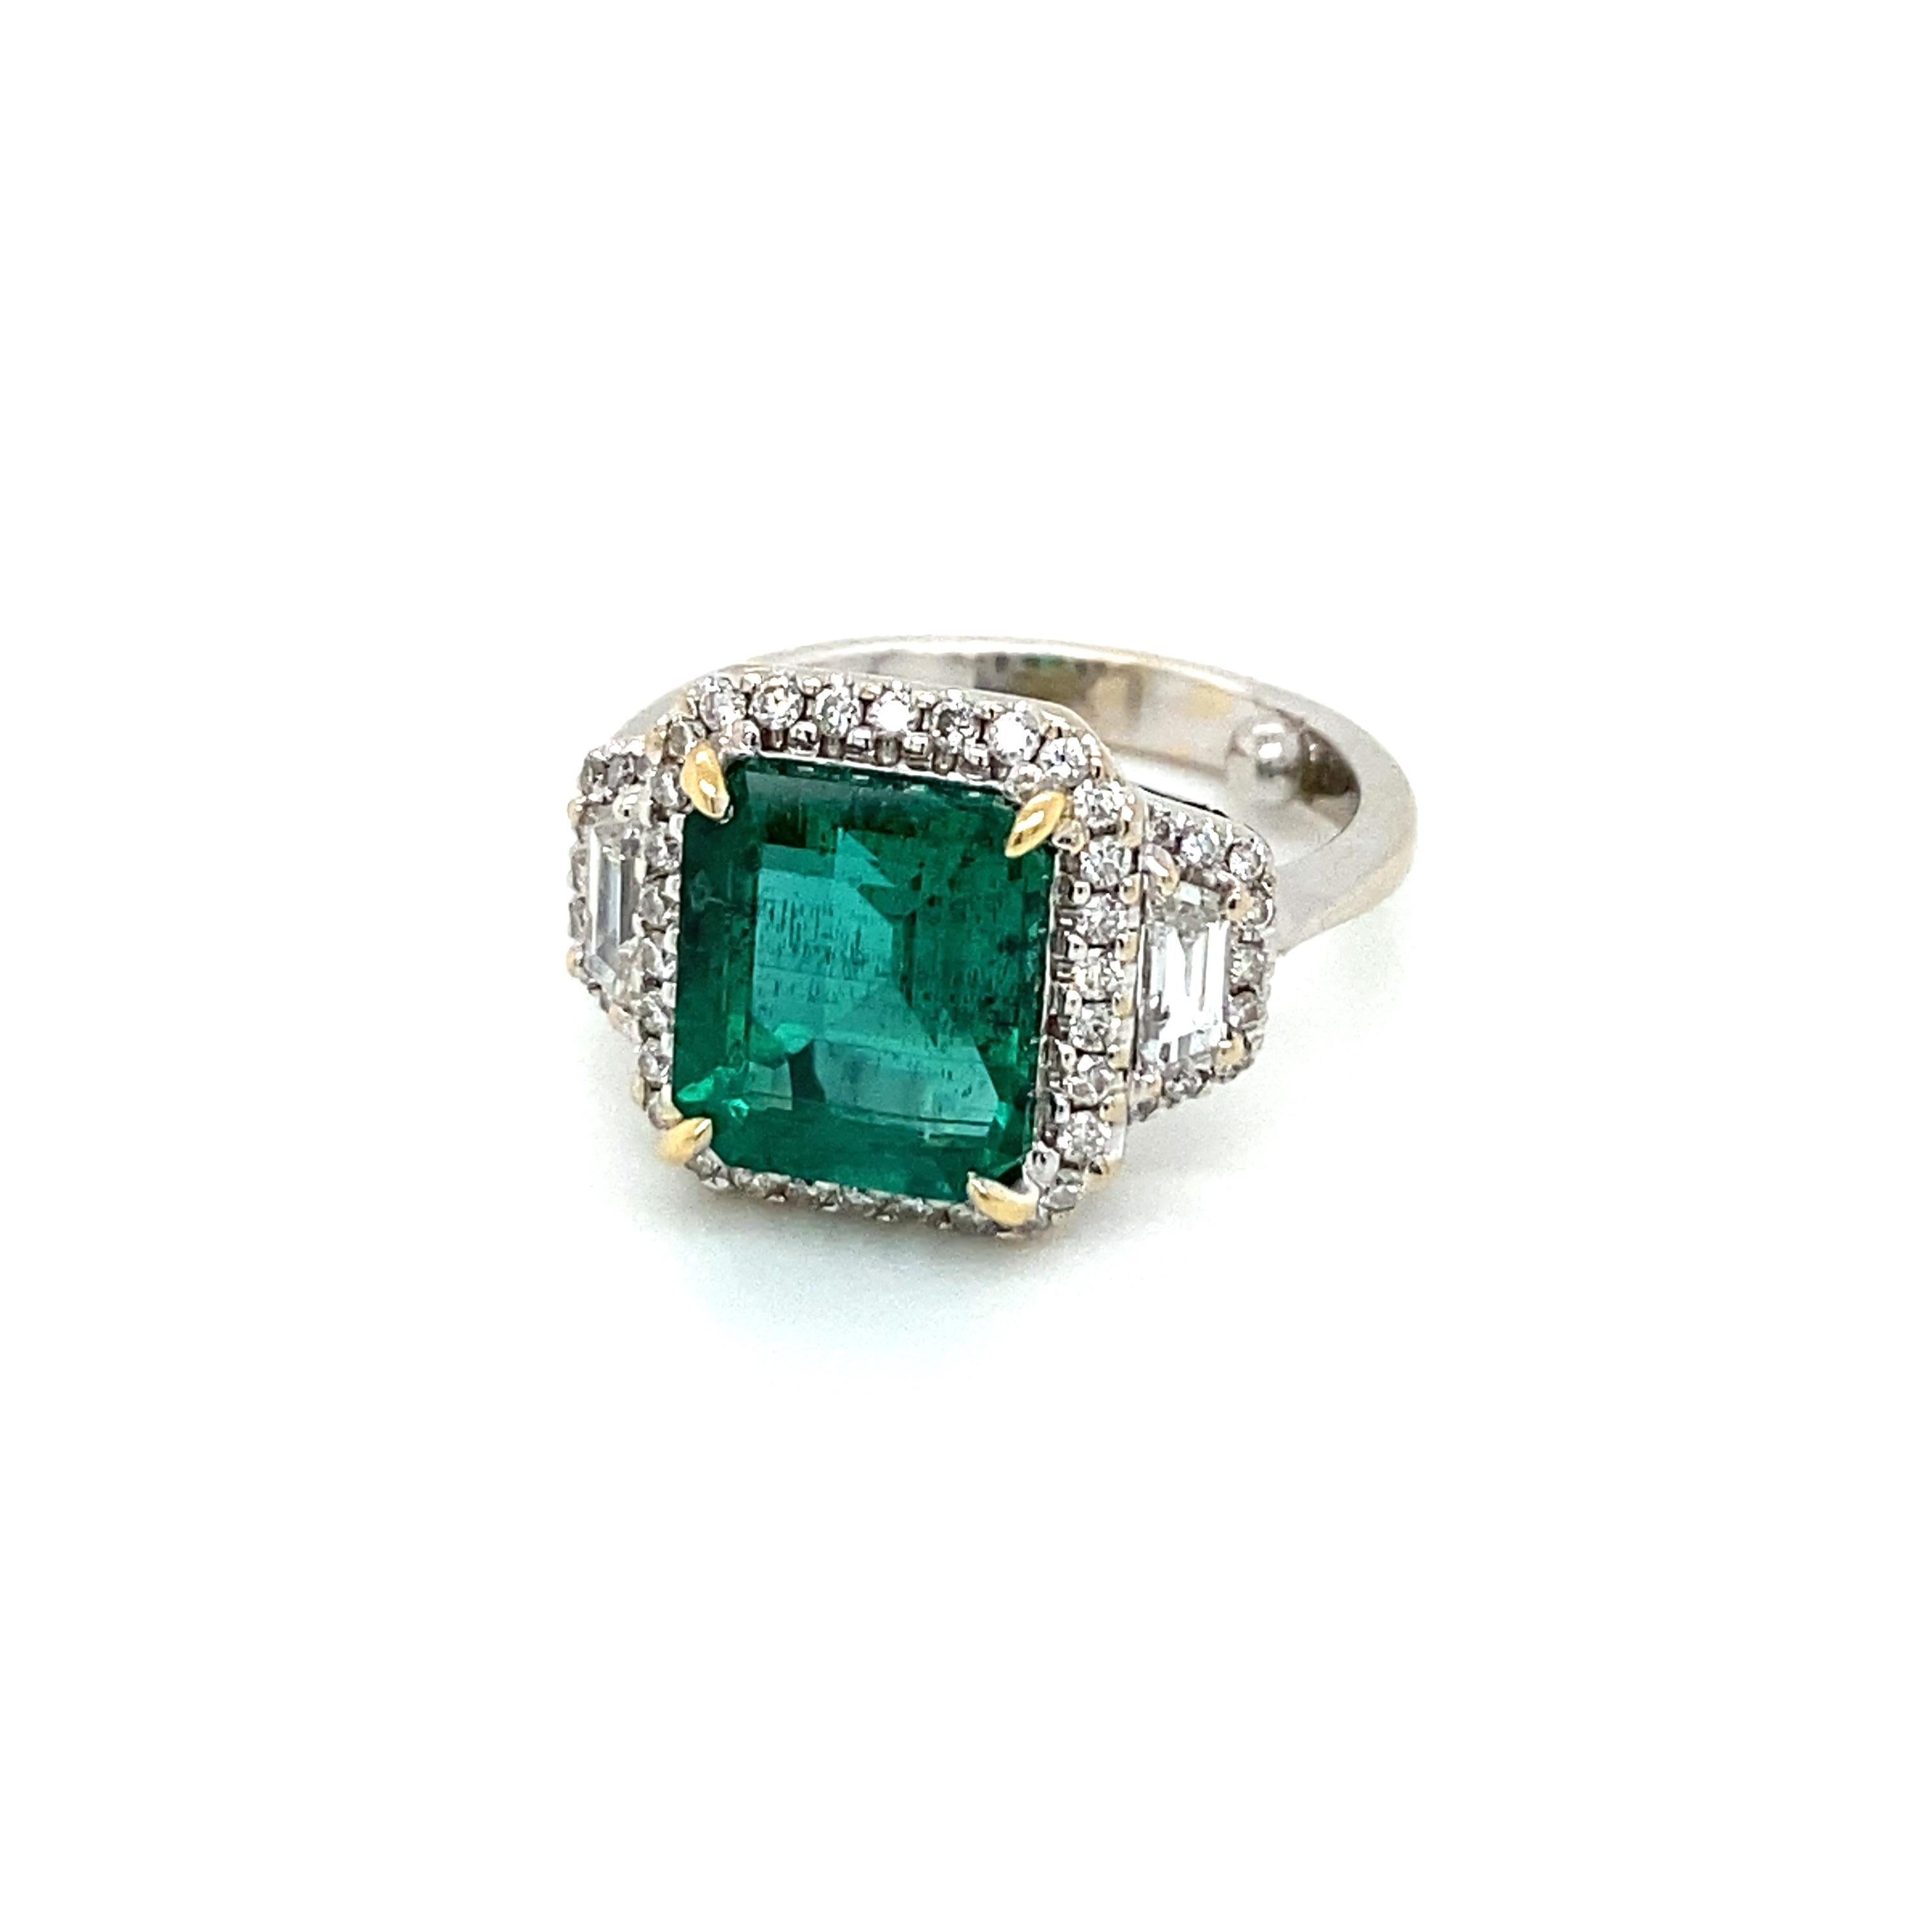 Contemporary Estate Certified 3.34 Carat Natural Emerald Diamond Ring For Sale